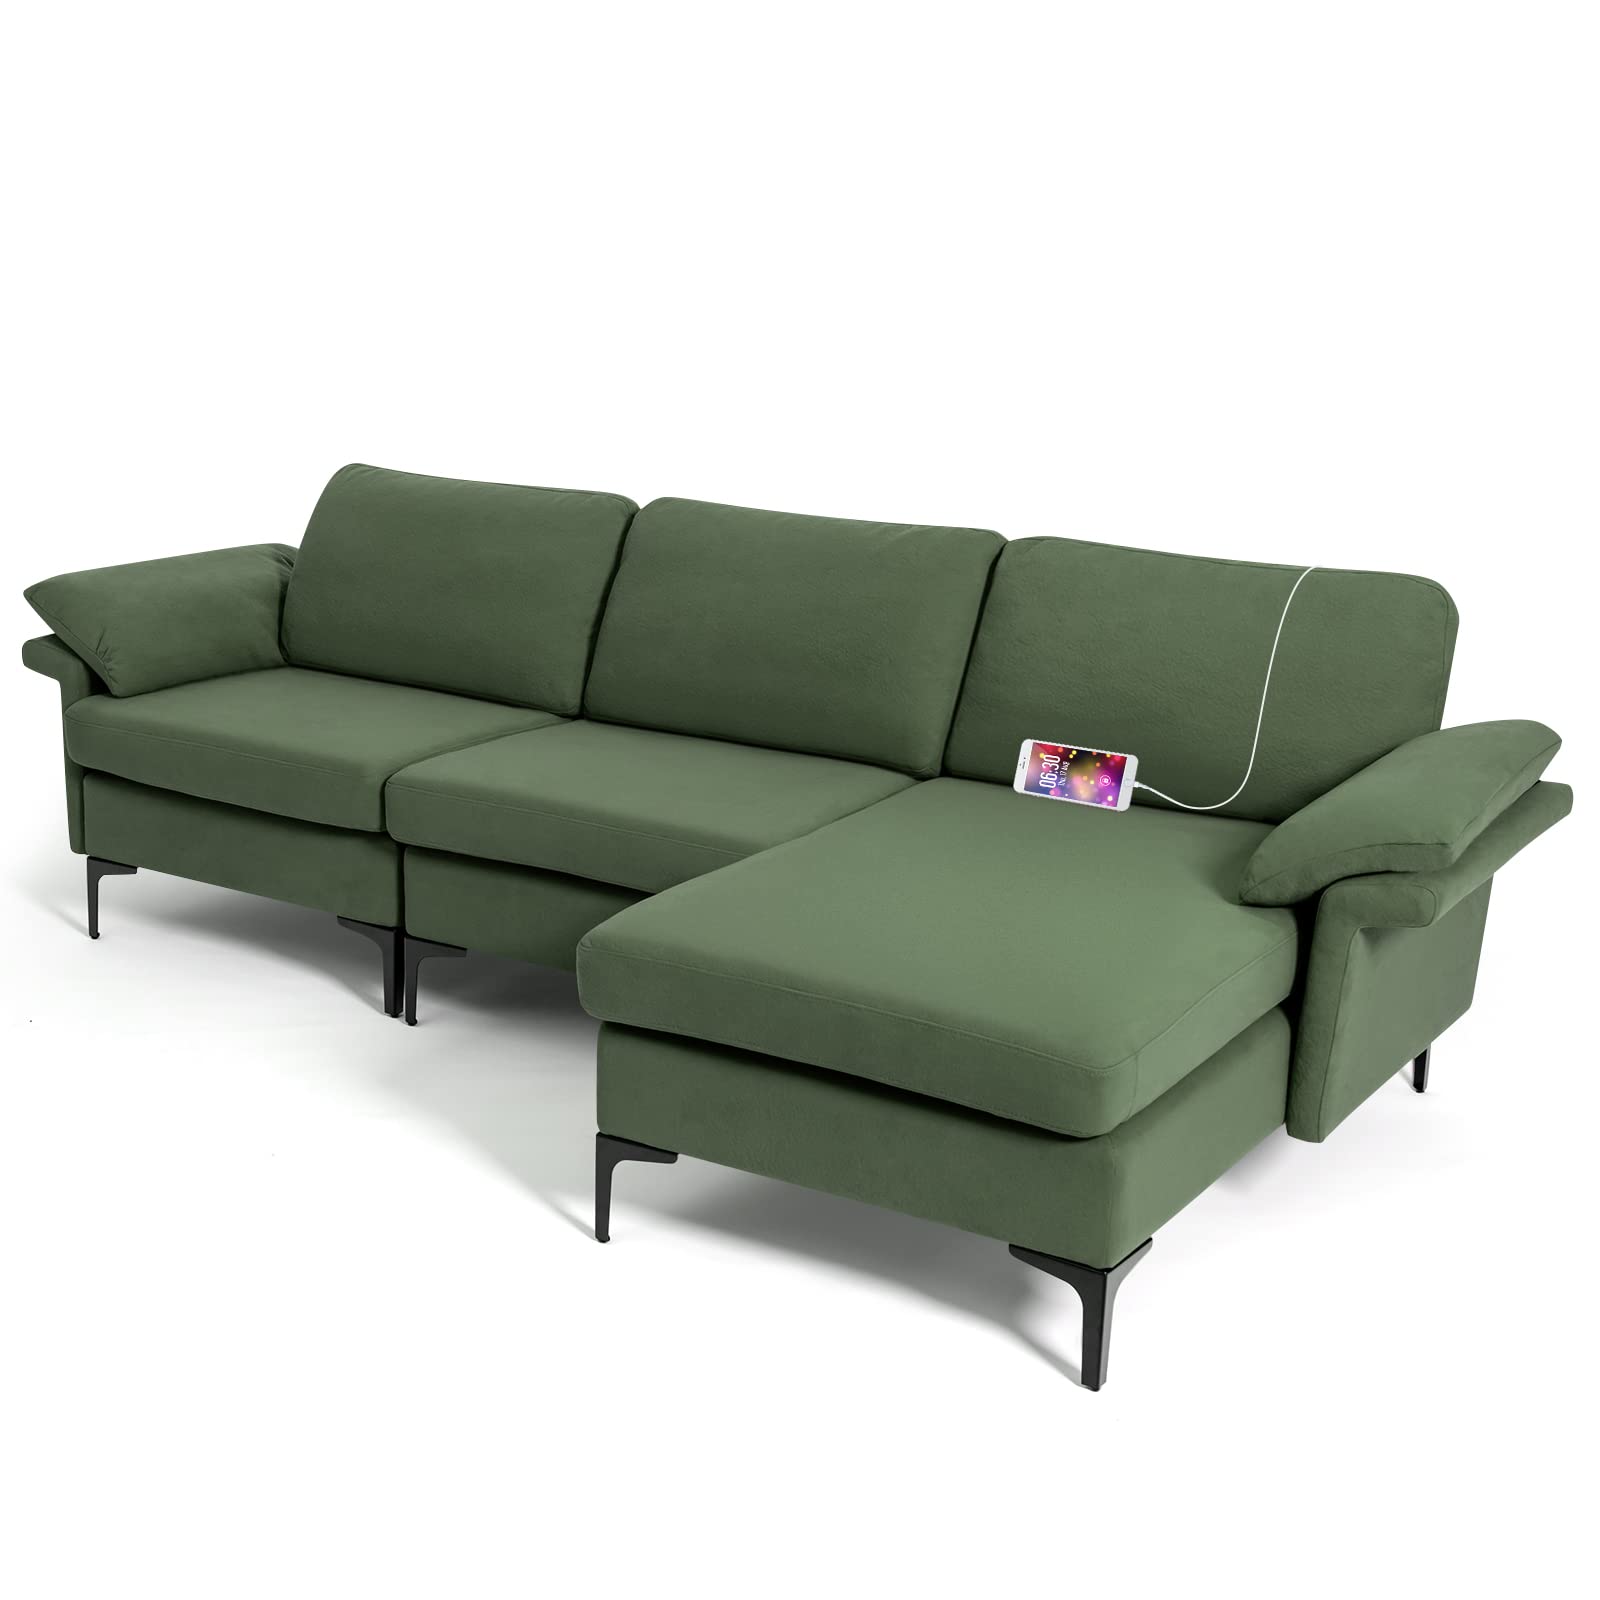 Giantex 100.5" L Convertible Sofa Couch, 3-Seat Sectional Sleeper with USB Ports & Socket